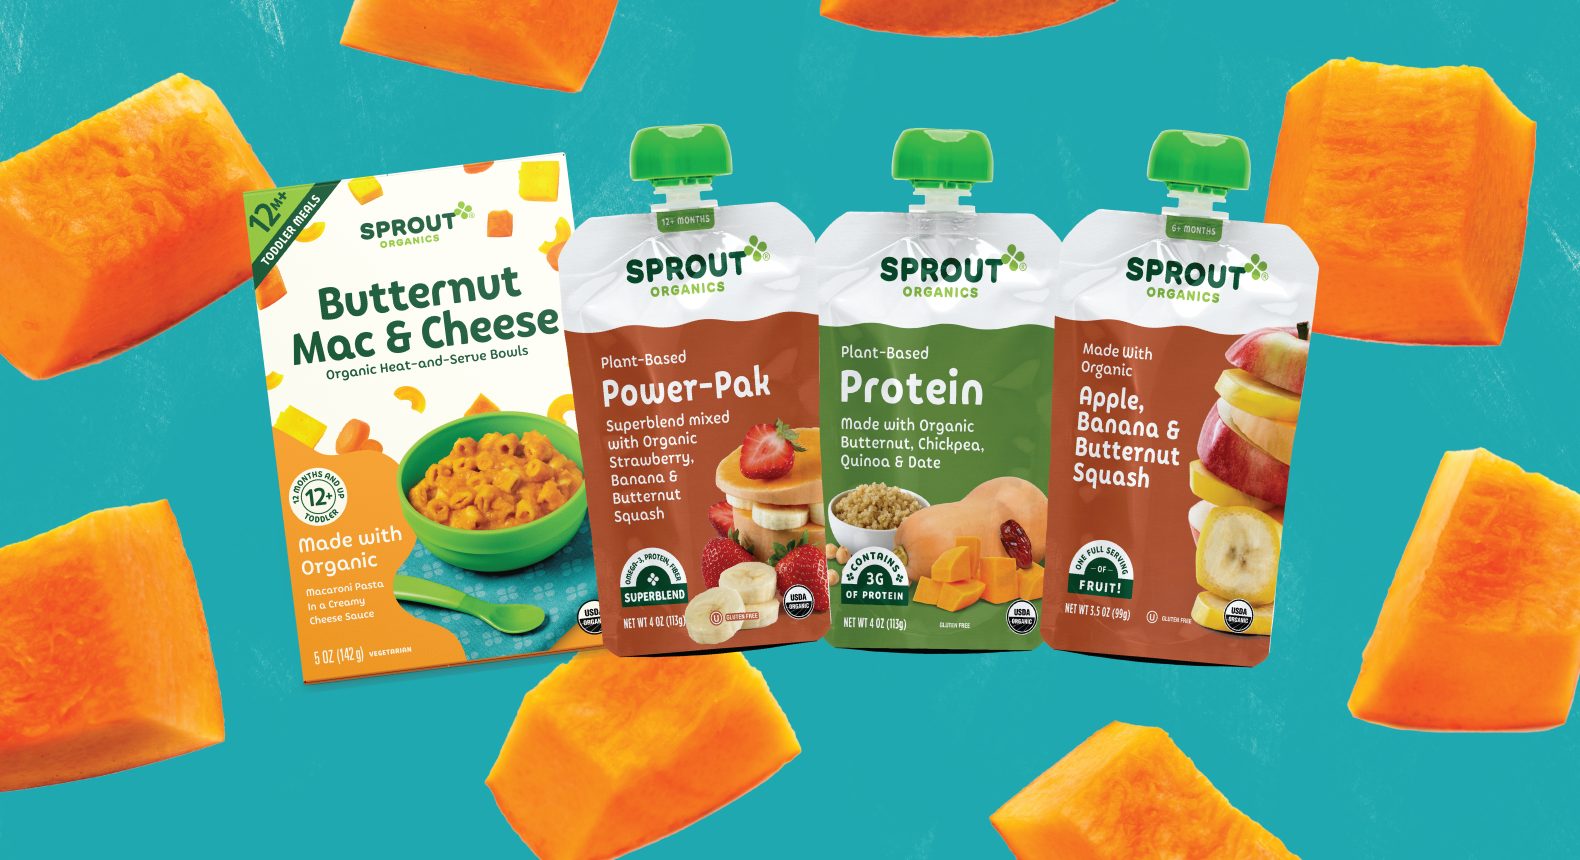 sprout organics products with butternut squash on a blue background